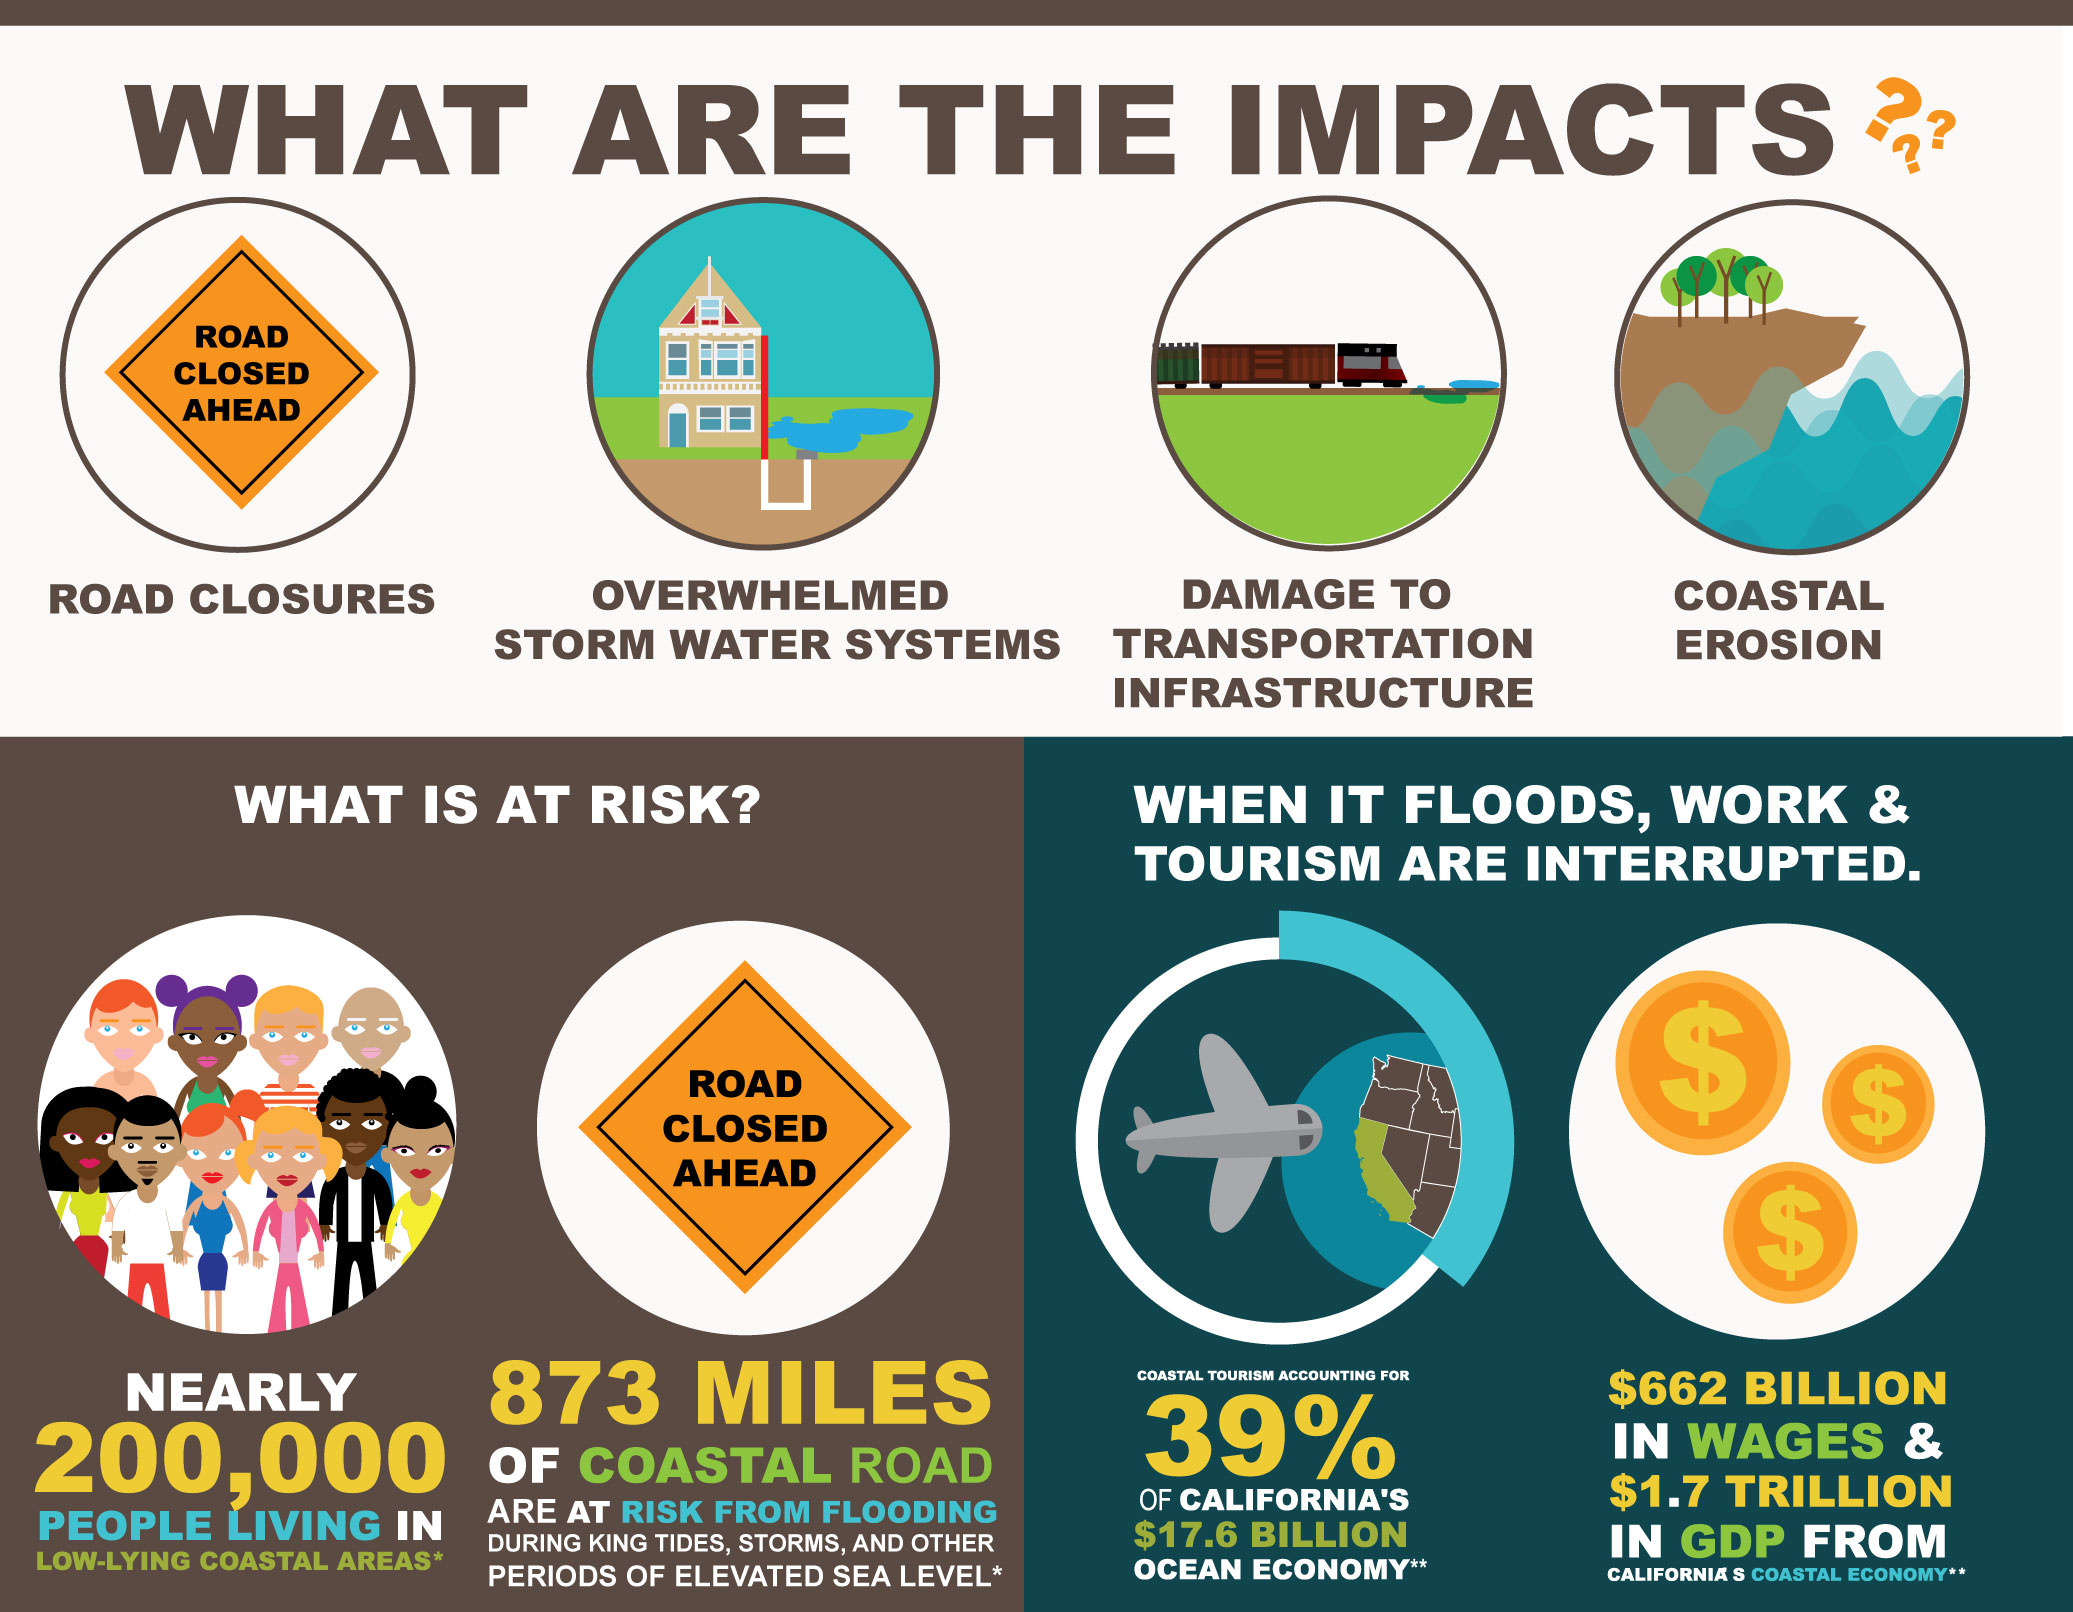 Graphic showing the impacts of nuisance flooding, including road closures, overwhelmed storm water systems, transporation infrastructure, and coastal erosion. Nearly 200,000 Californians live in low-lying coastal areas and 873 miles of coastal roads are at risk from flooding during King Tides, storms, and other periods of elevated sea level. When flooding occurs, work and tourism are also interrupted: coastal tourism accounts for 39 percent of California's $17.6 billion ocean economy; the state's coastal economy accounts for $662 billion in wages and $1.7 trillion in Gross Domestic Product. 